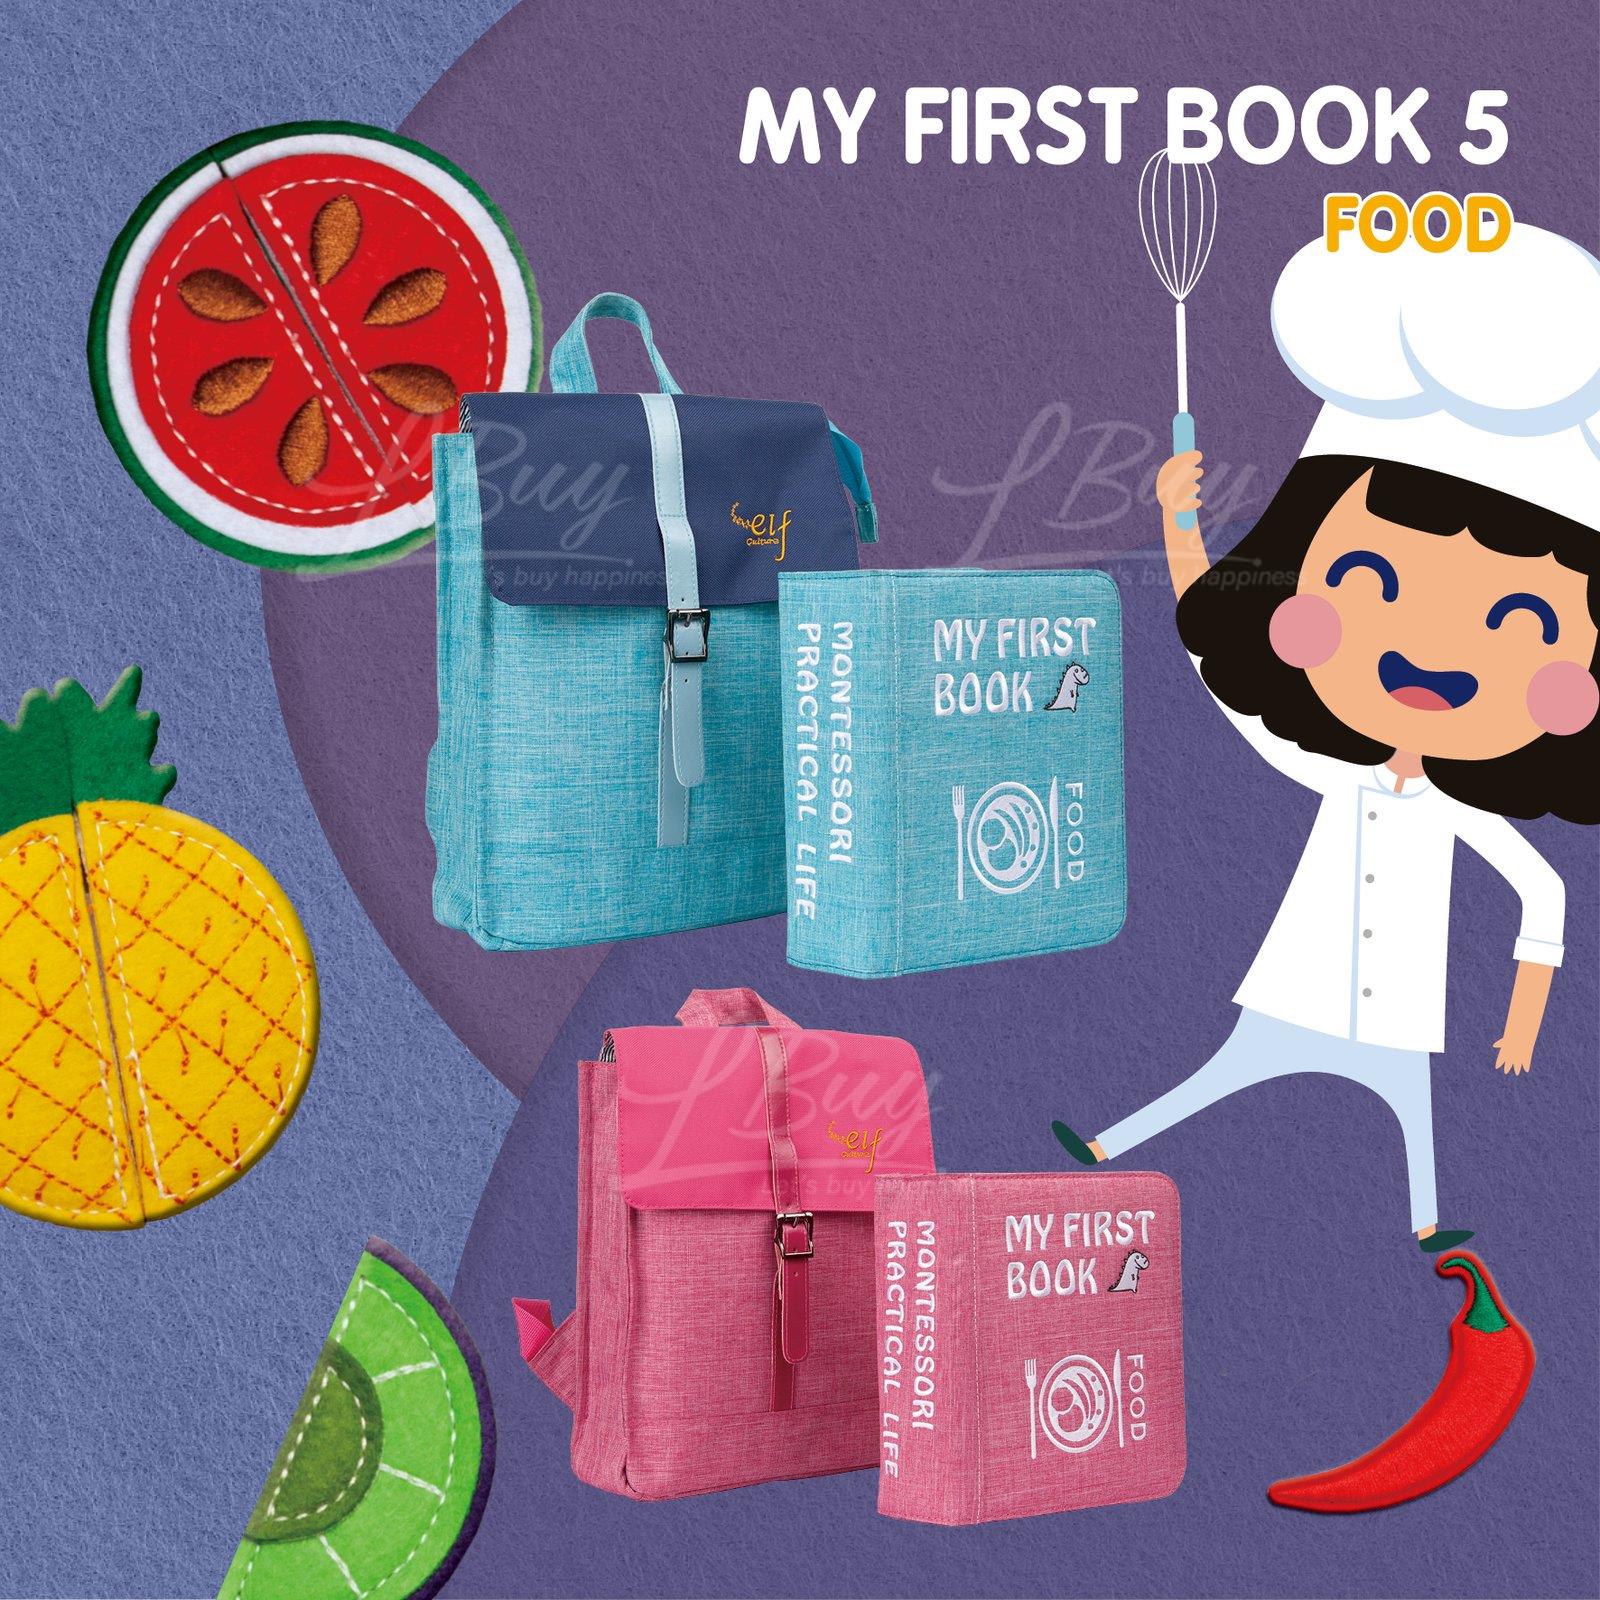 My First Book 5 - Food (0-3Y)